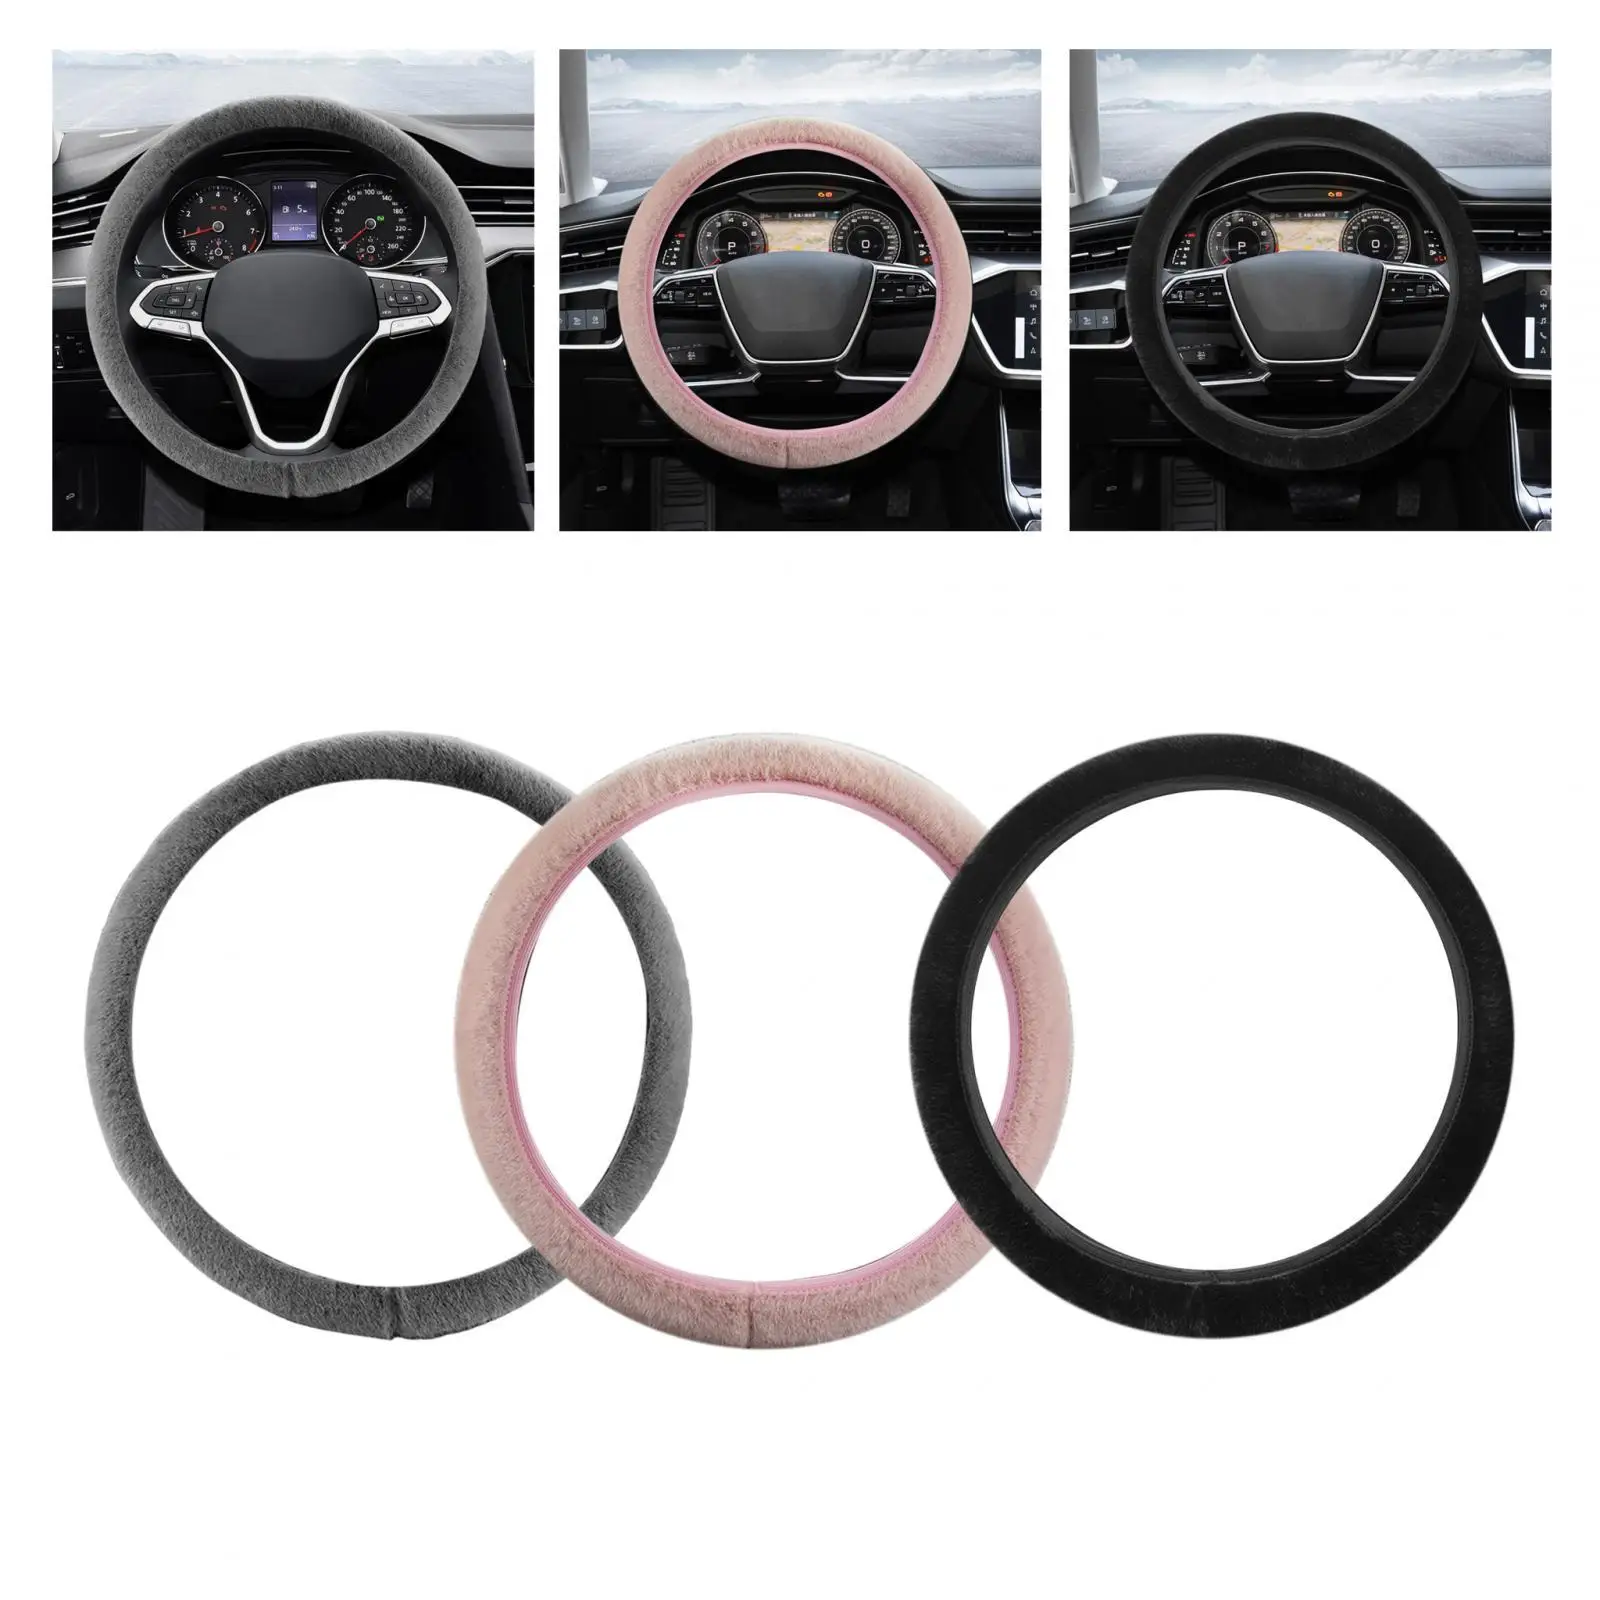 38cm Soft Plush Car Steering Wheel Cover Breathable Lightweight Stylish Easily Install Accessories Comfortable Grip Anti Slip